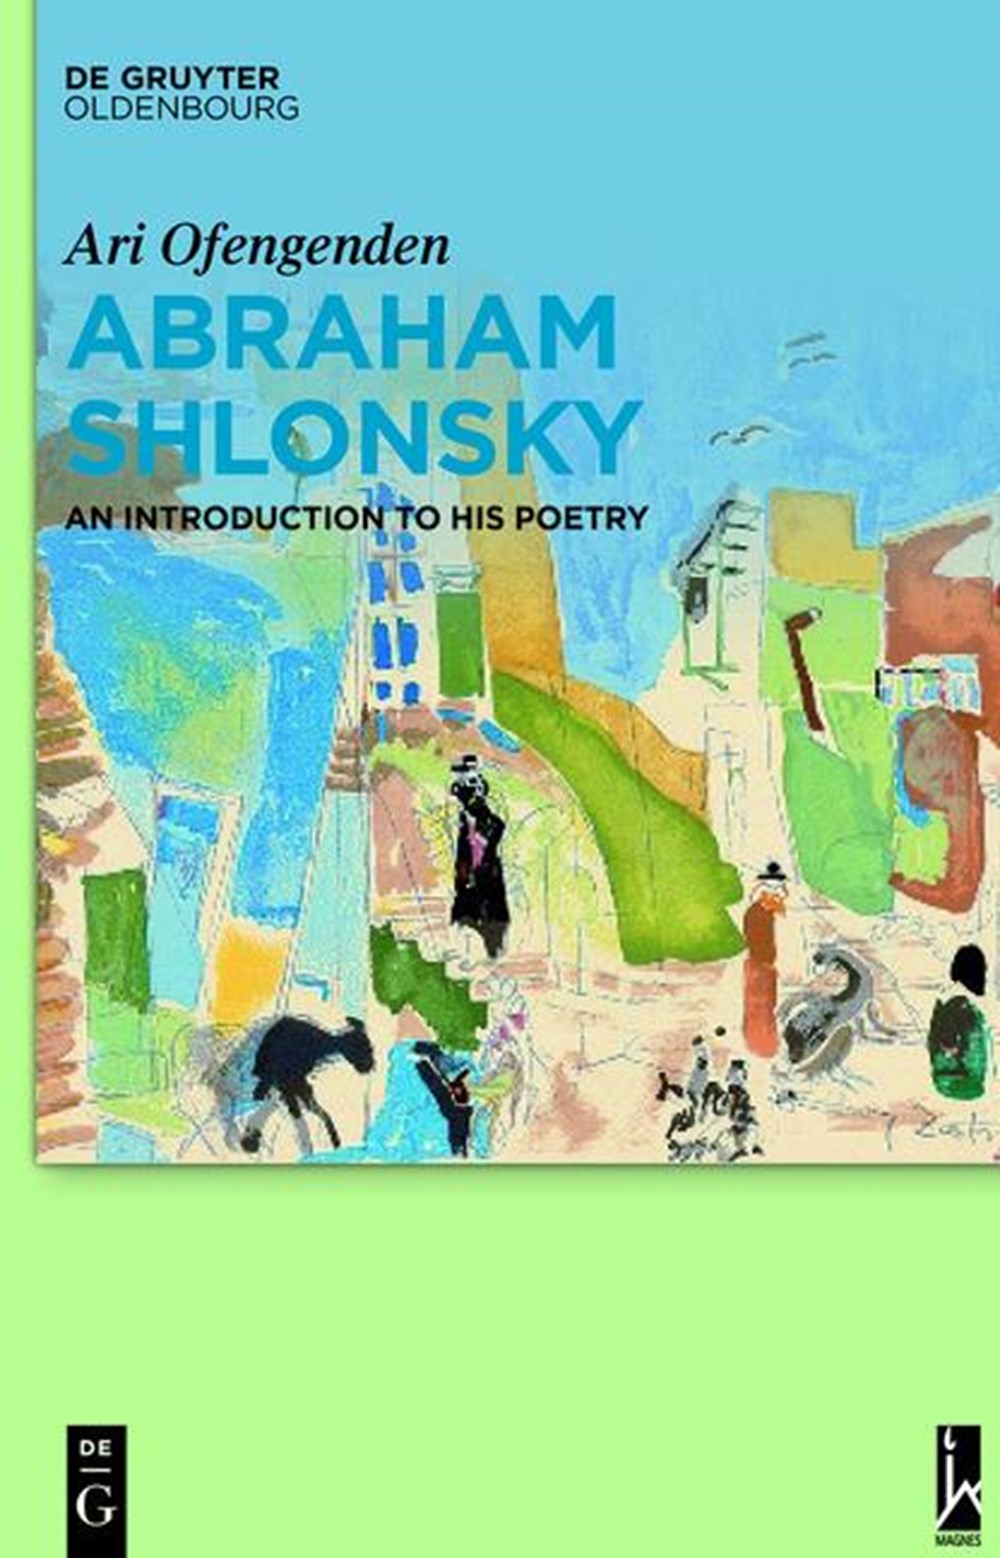 Abraham Shlonsky: An Introduction to His Poetry